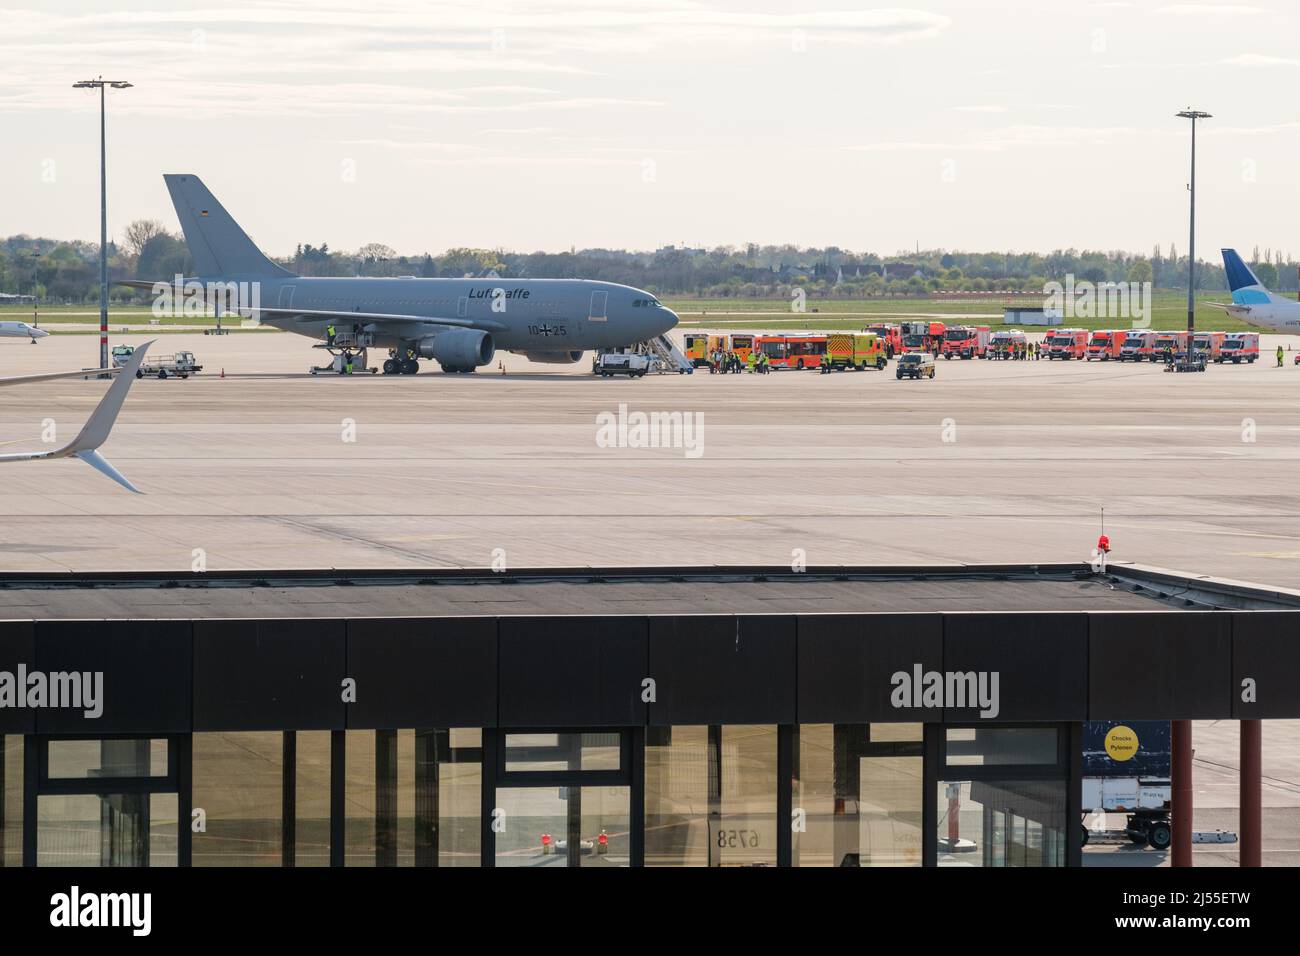 Langenhagen, Germany. 20th Apr, 2022. A German Air Force A310 MedEvac stands next to numerous ambulances on the tarmac at Hannover Airport. The special A310 MedEvac aircraft is to bring injured Ukrainian civilians to Germany for medical treatment. The A310 MedEvac is the air force's flying intensive care unit. After landing, further treatment will take place in civilian hospitals. Credit: Ole Spata/dpa/Alamy Live News Stock Photo